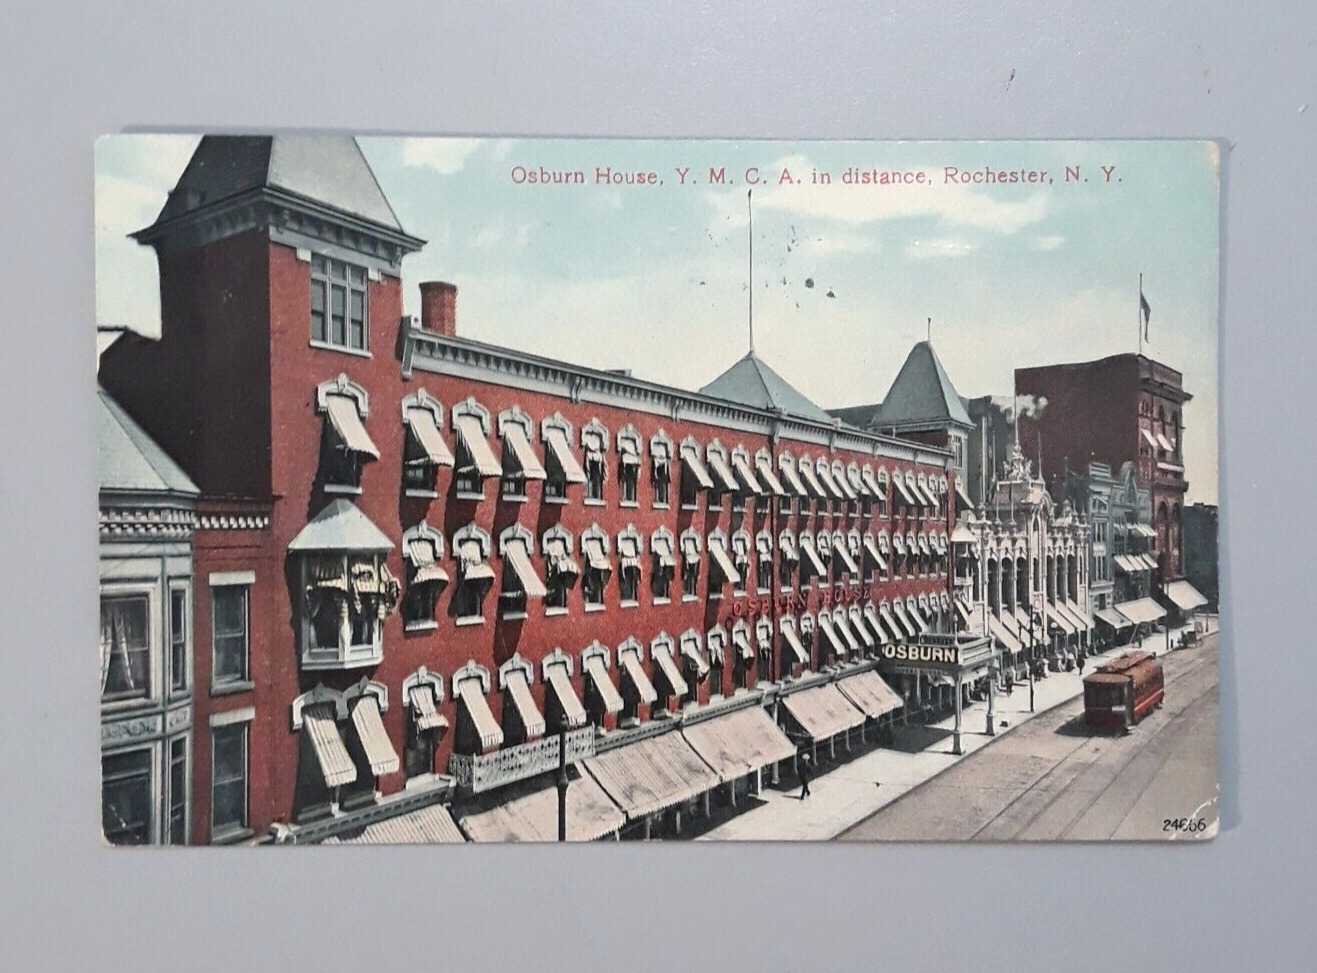 Vintage 1910 Postcard Rochester NY - OSBURN HOUSE Y.M.C.A. IN DISTANCE